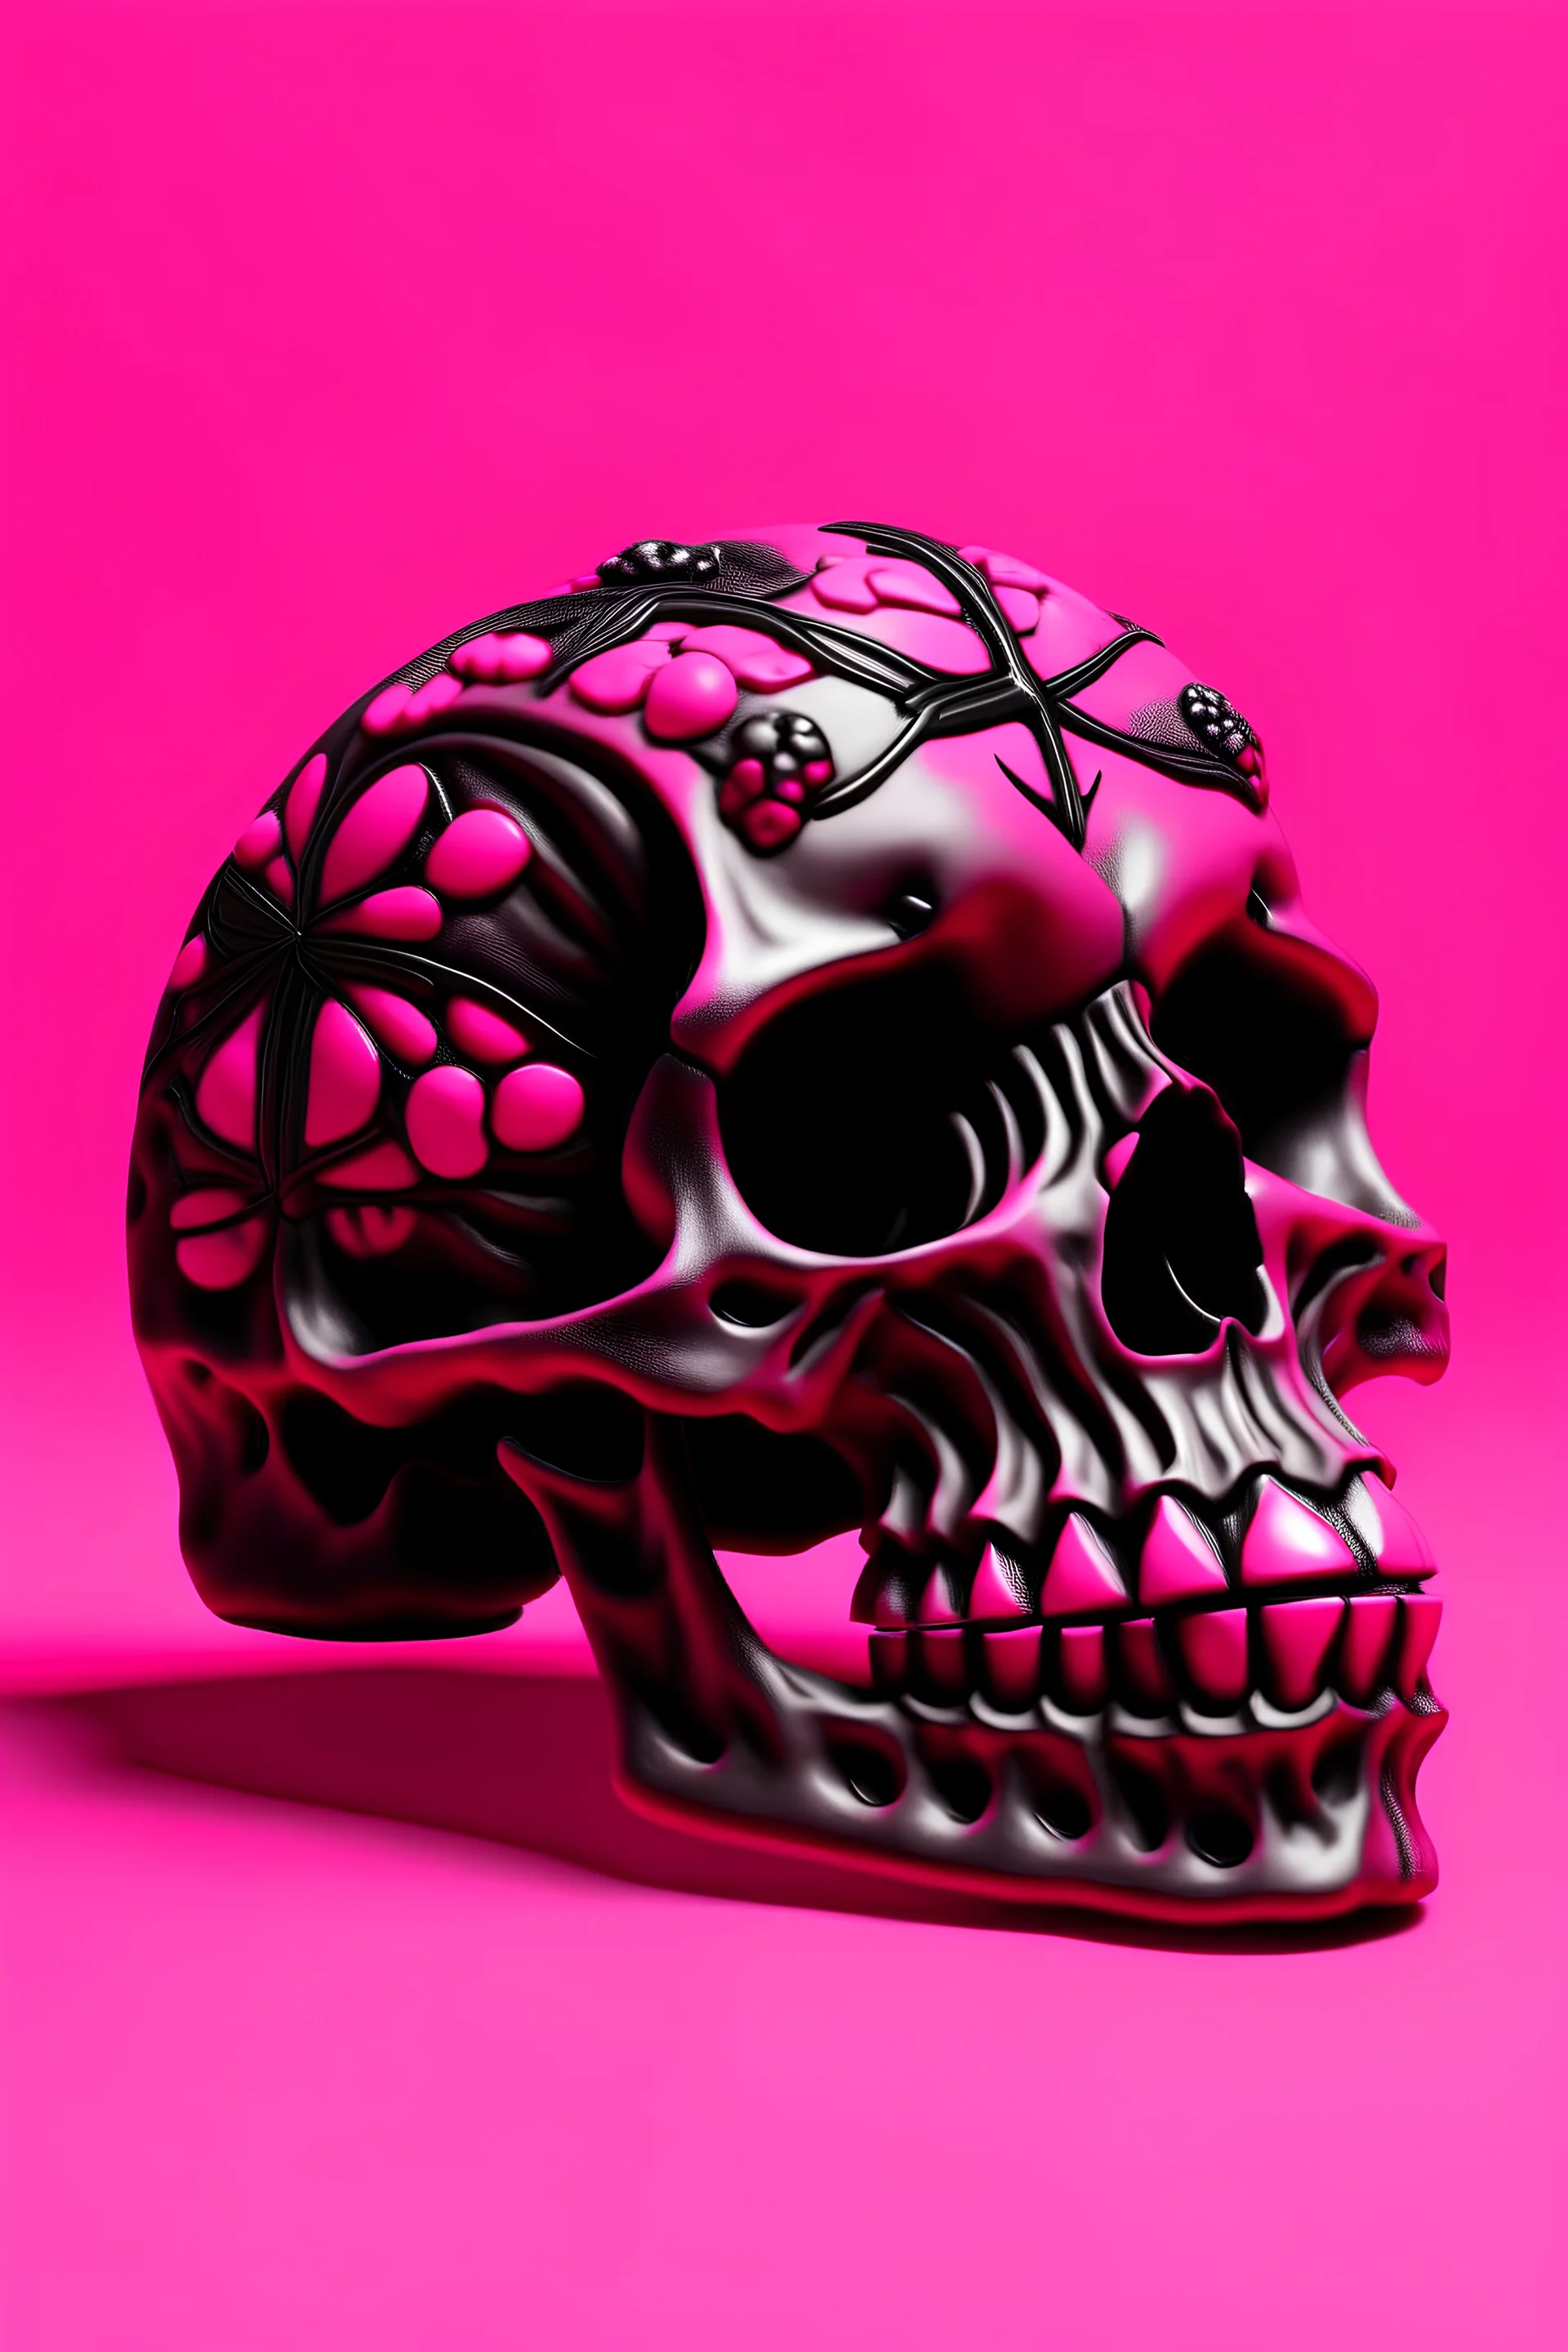 Full rubber pastel pink brain with star eyes on a skull with rubber effect and a black butterfly far away on a fuxia background